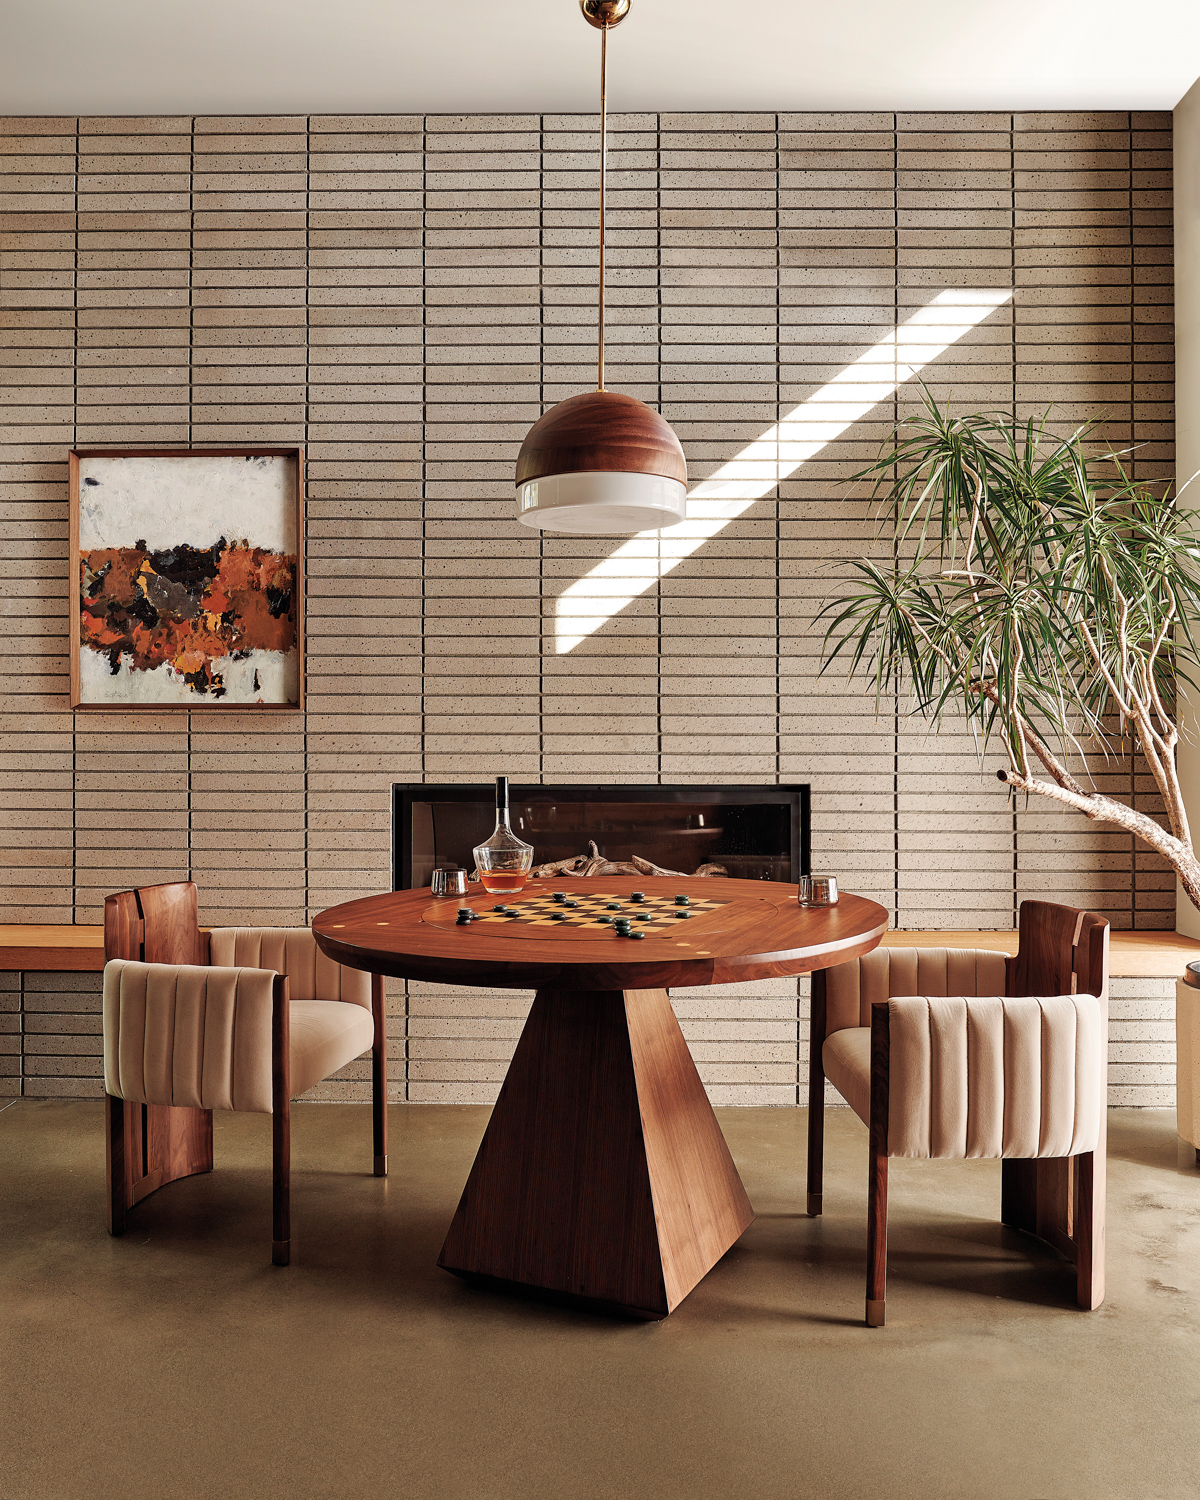 Geometric wood dining table with two chairs by Lawson-Fenning for CB2 on display in front of a textured wall and fireplace